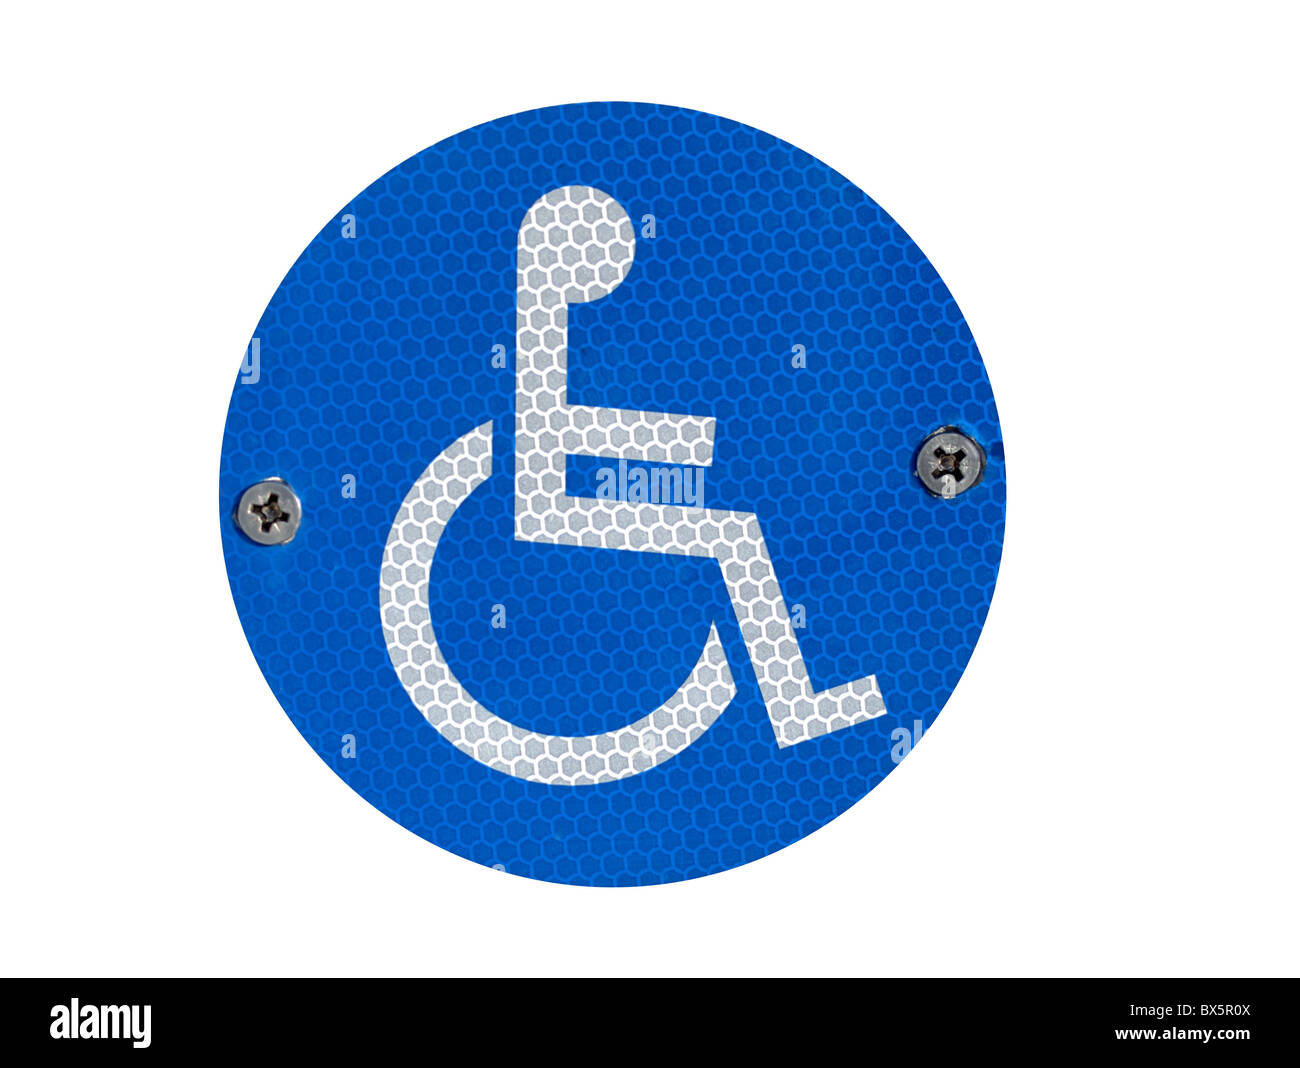 A reflective disabled parking sign - isolated over white Stock Photo